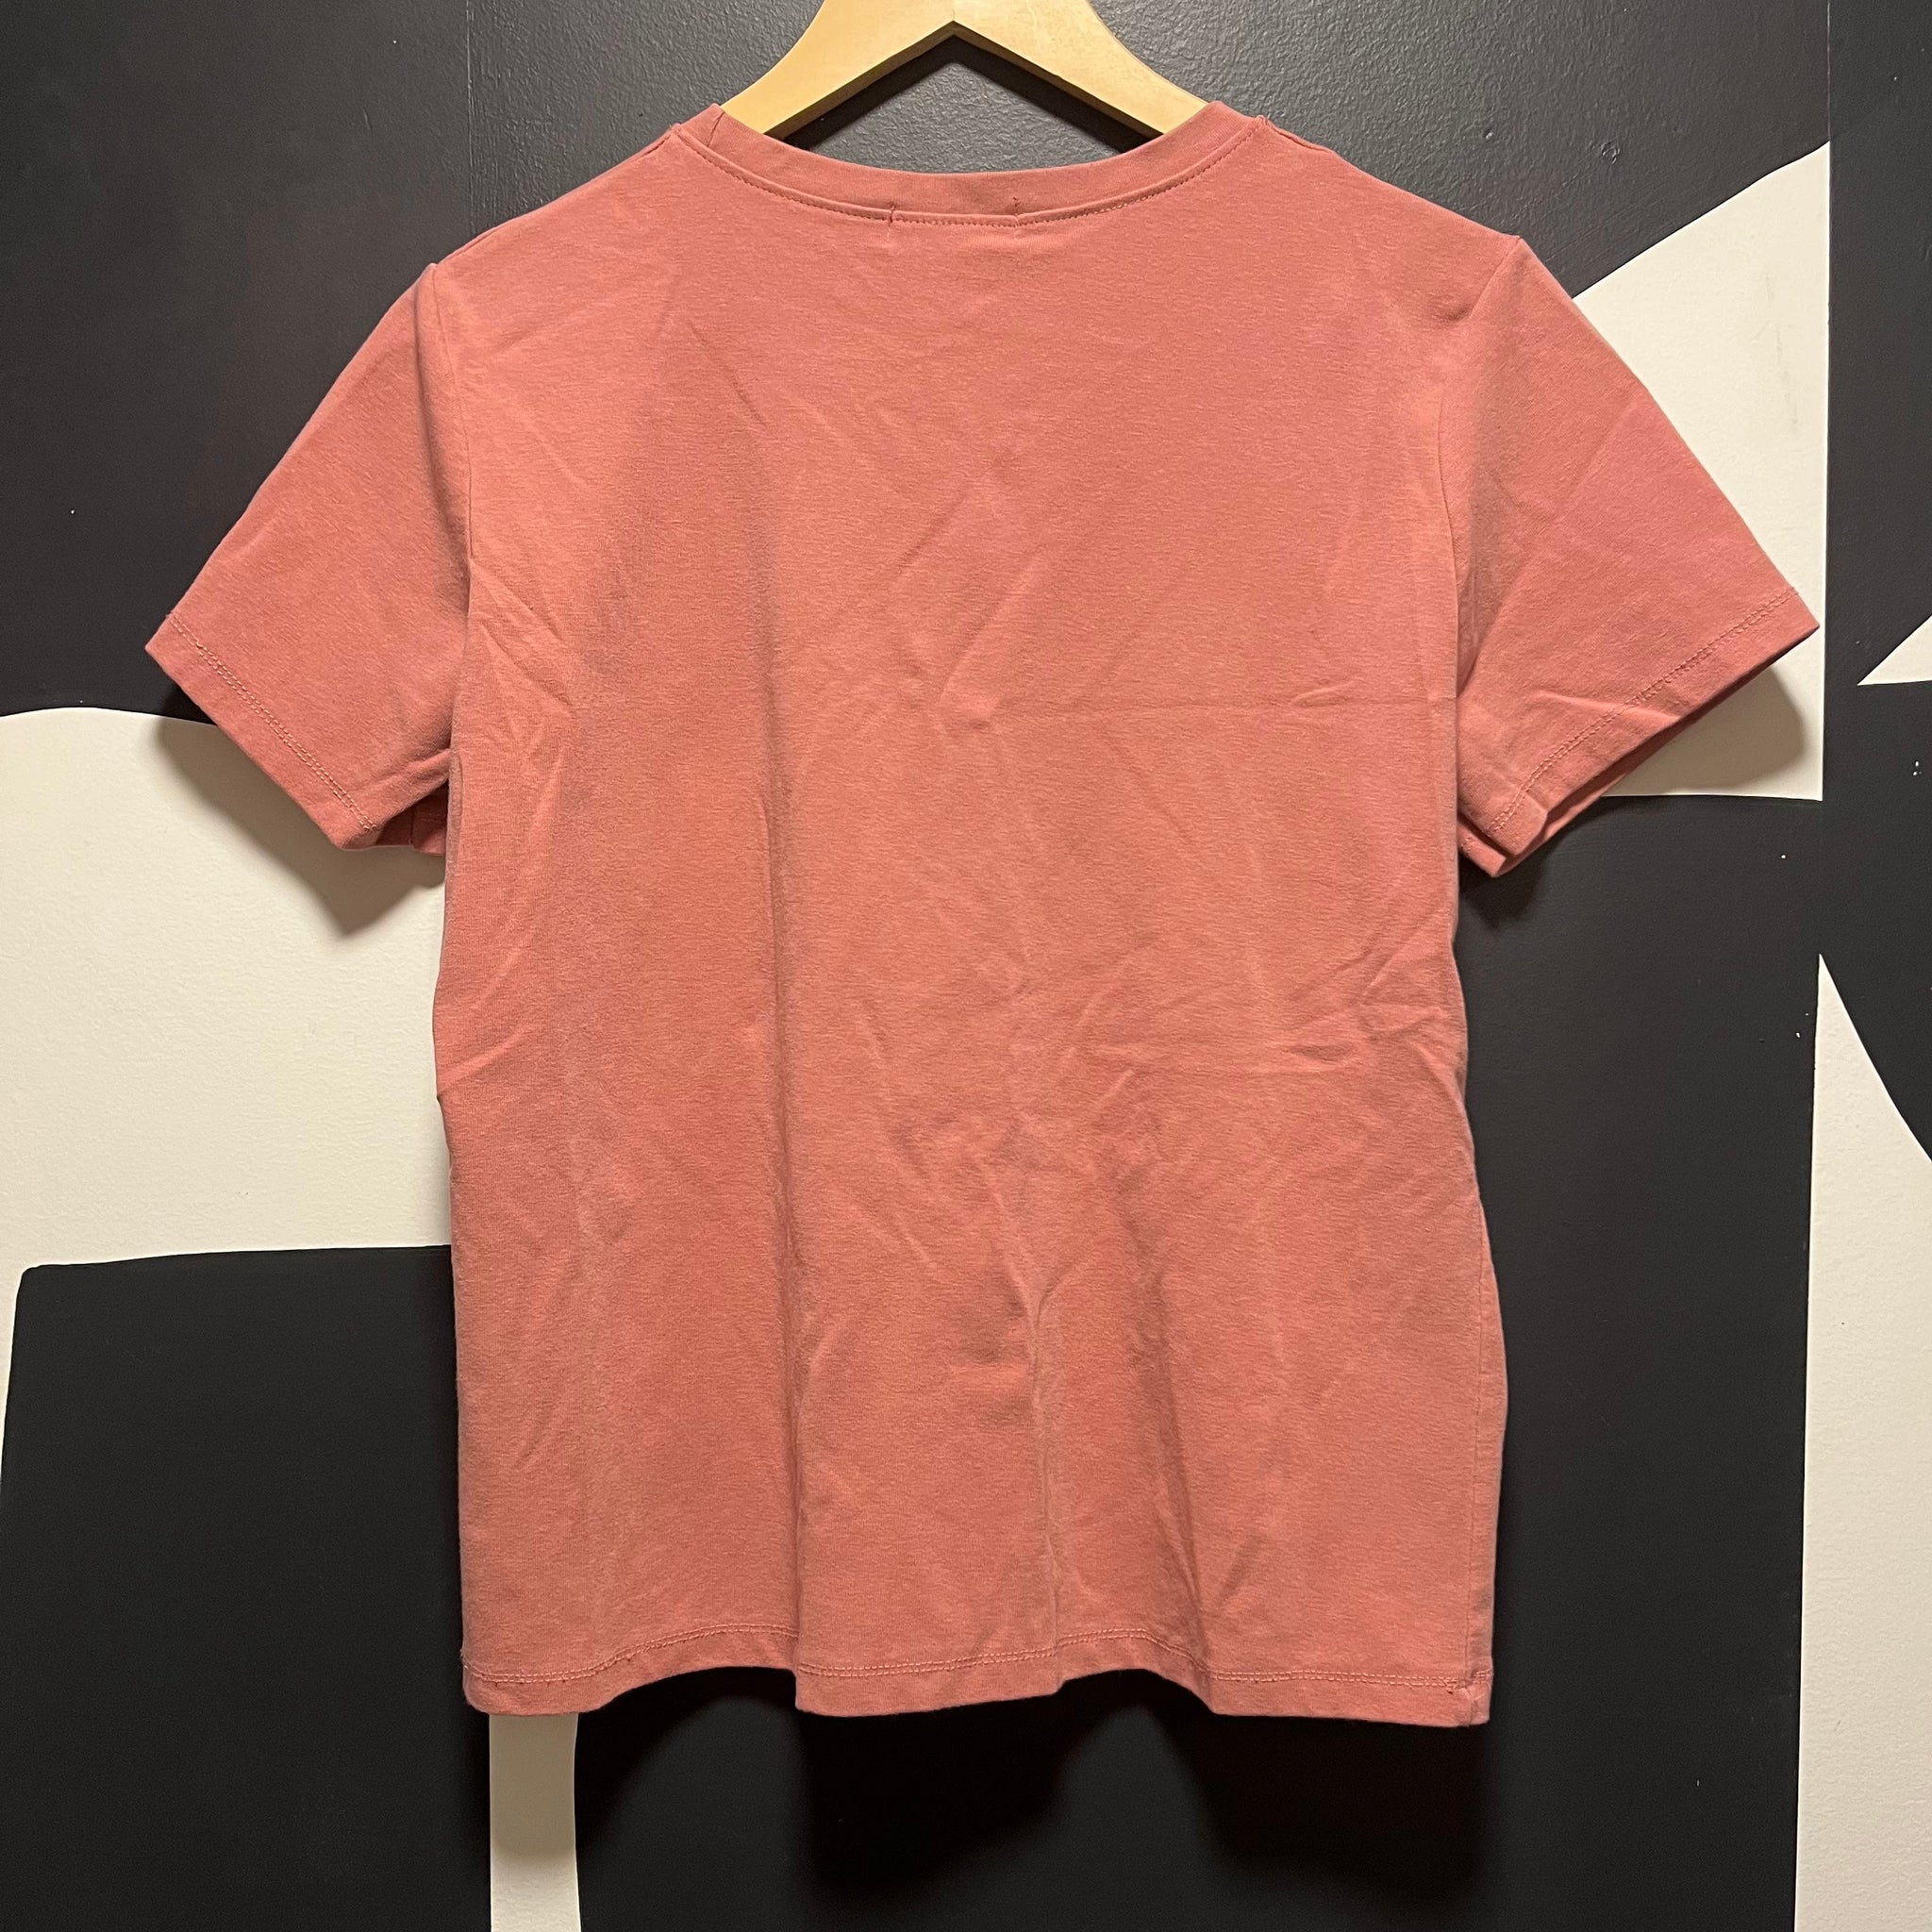 Dusty Rose Bedazzled 'Gucci' Tee | M